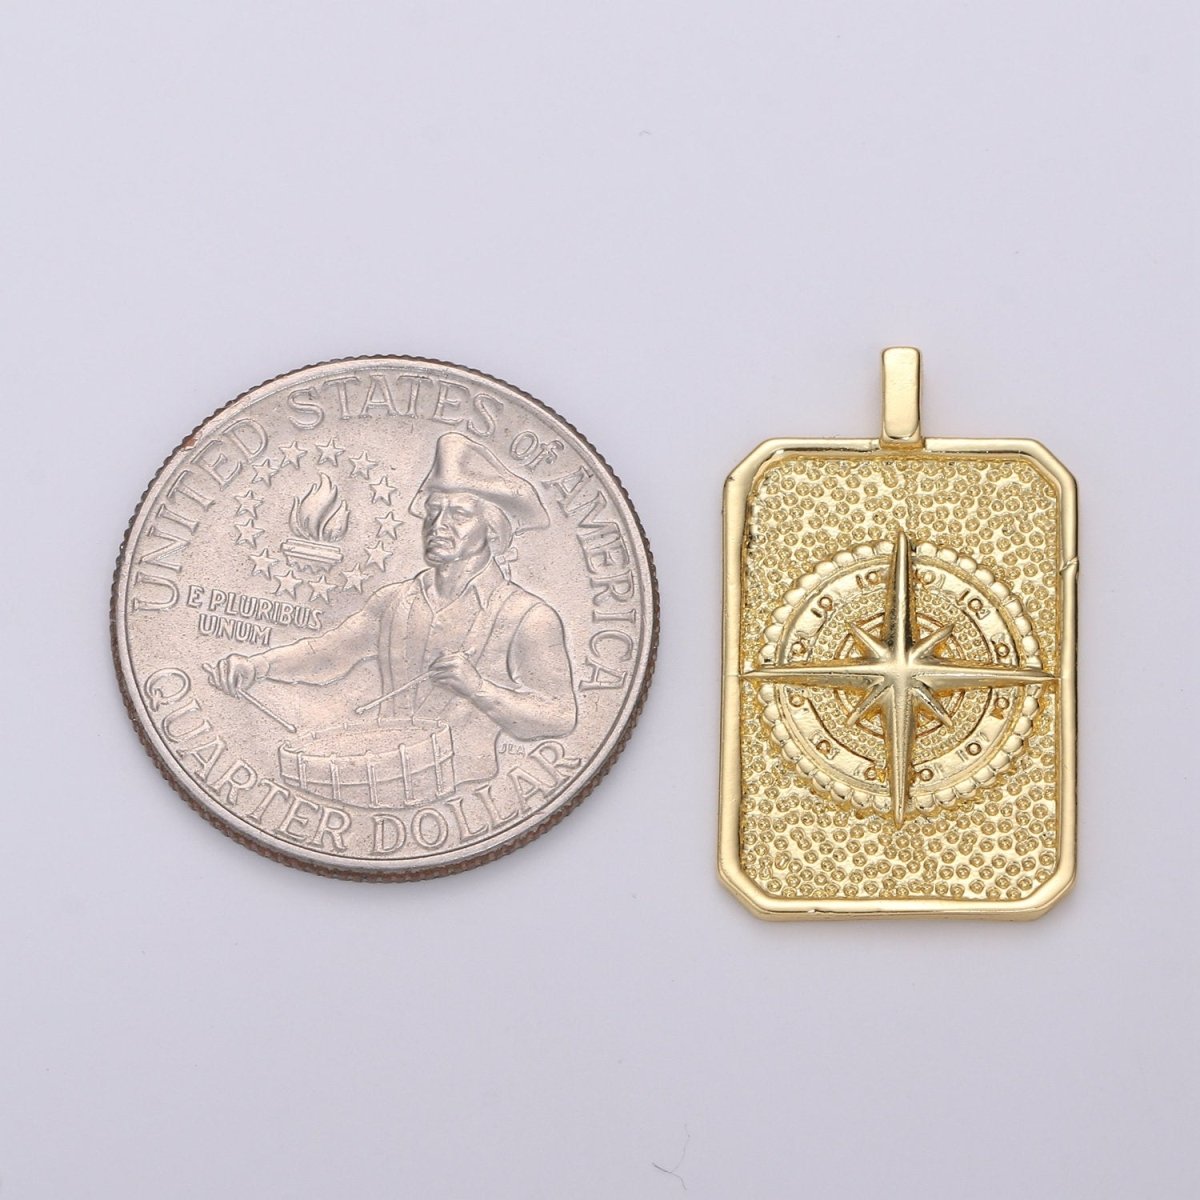 Tag Charm 14k Gold Filled coin pendant, Medallion charms,Compass charms, Vintage Military Tag Charm for Necklace Bracelet Earring I-675 - DLUXCA